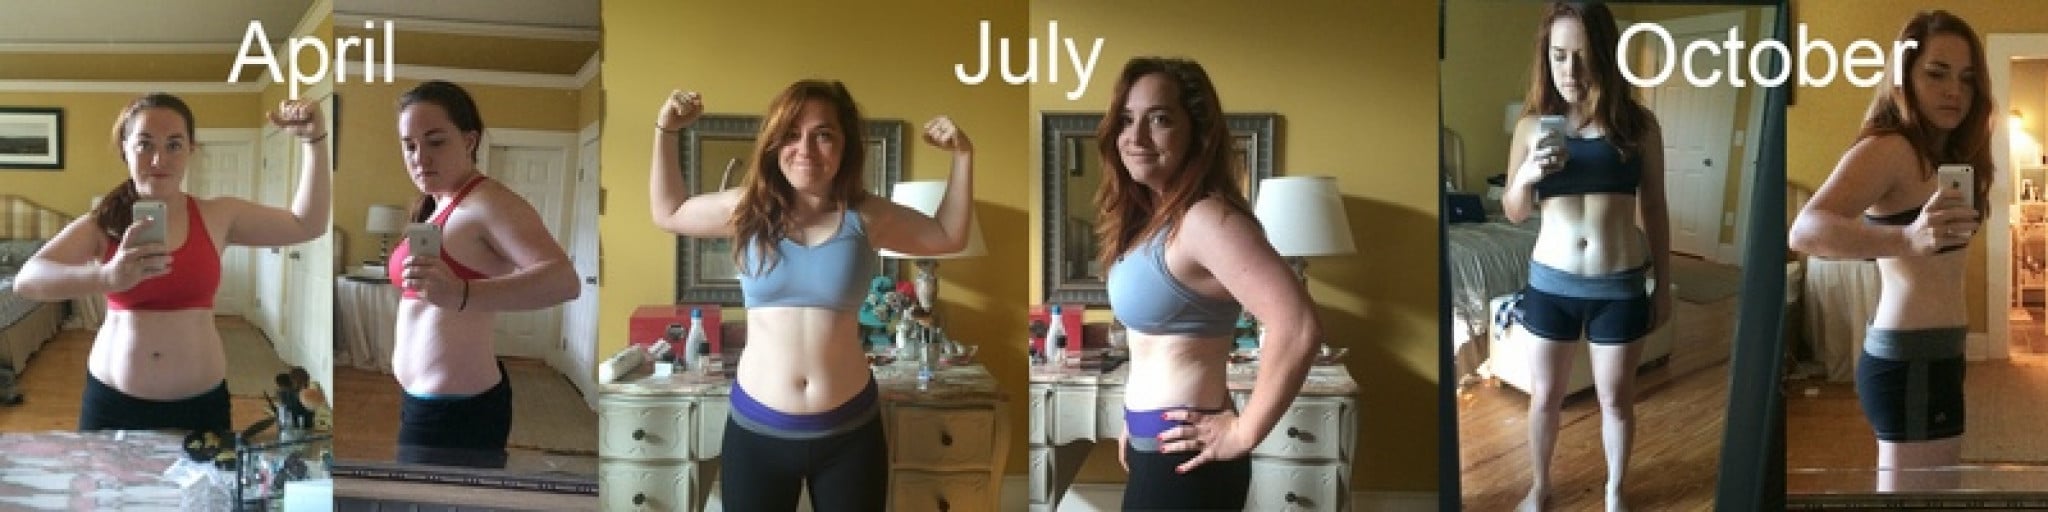 A photo of a 5'0" woman showing a weight cut from 146 pounds to 131 pounds. A total loss of 15 pounds.